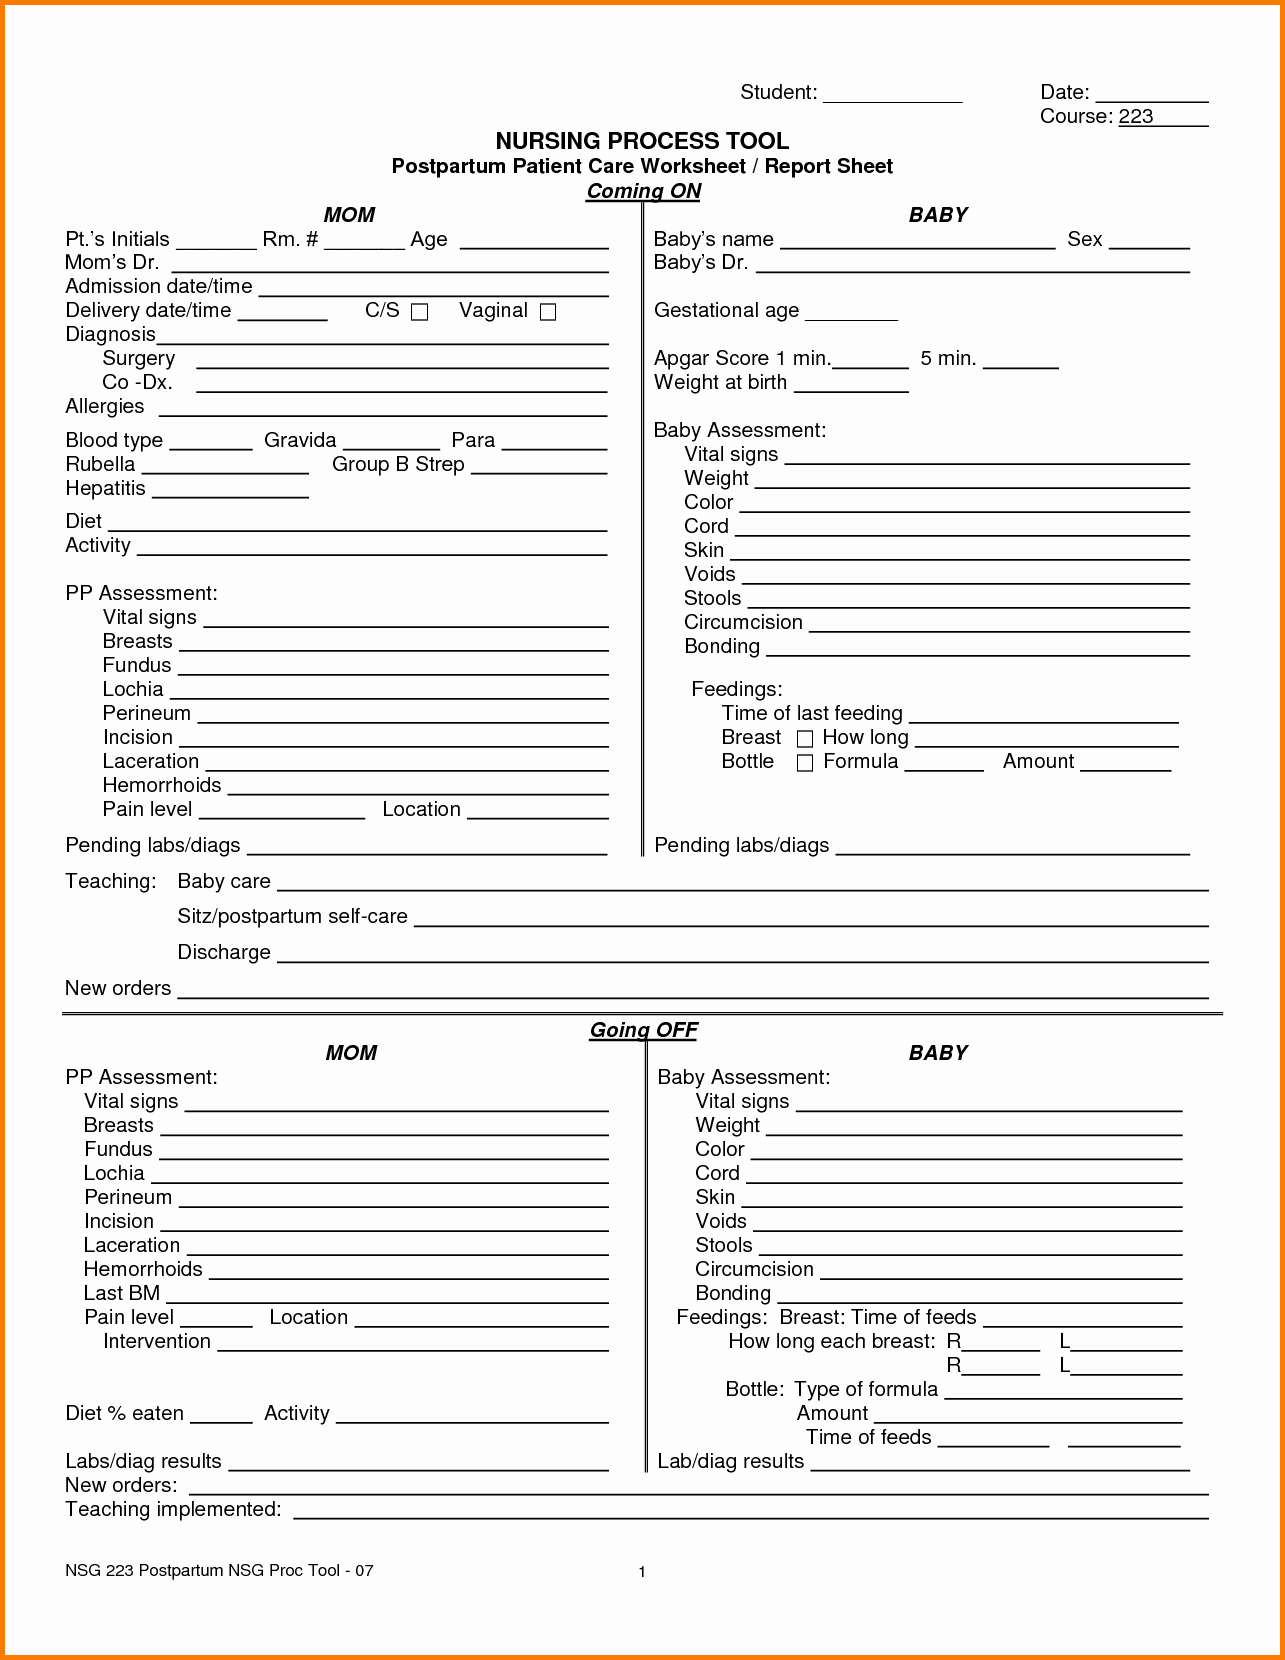 Printable Nurse Report Sheets That Are Critical | Darryl's Blog Pertaining To Nurse Report Sheet Templates